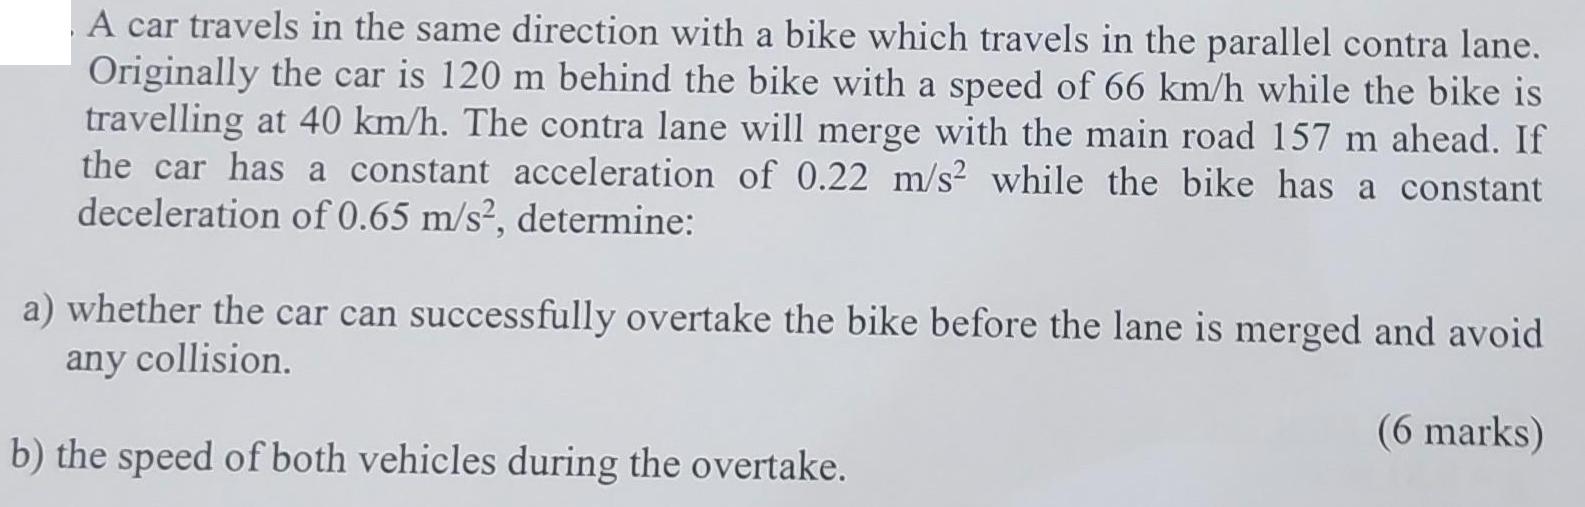 A car travels in the same direction with a bike which travels in the parallel contra lane. Originally the car